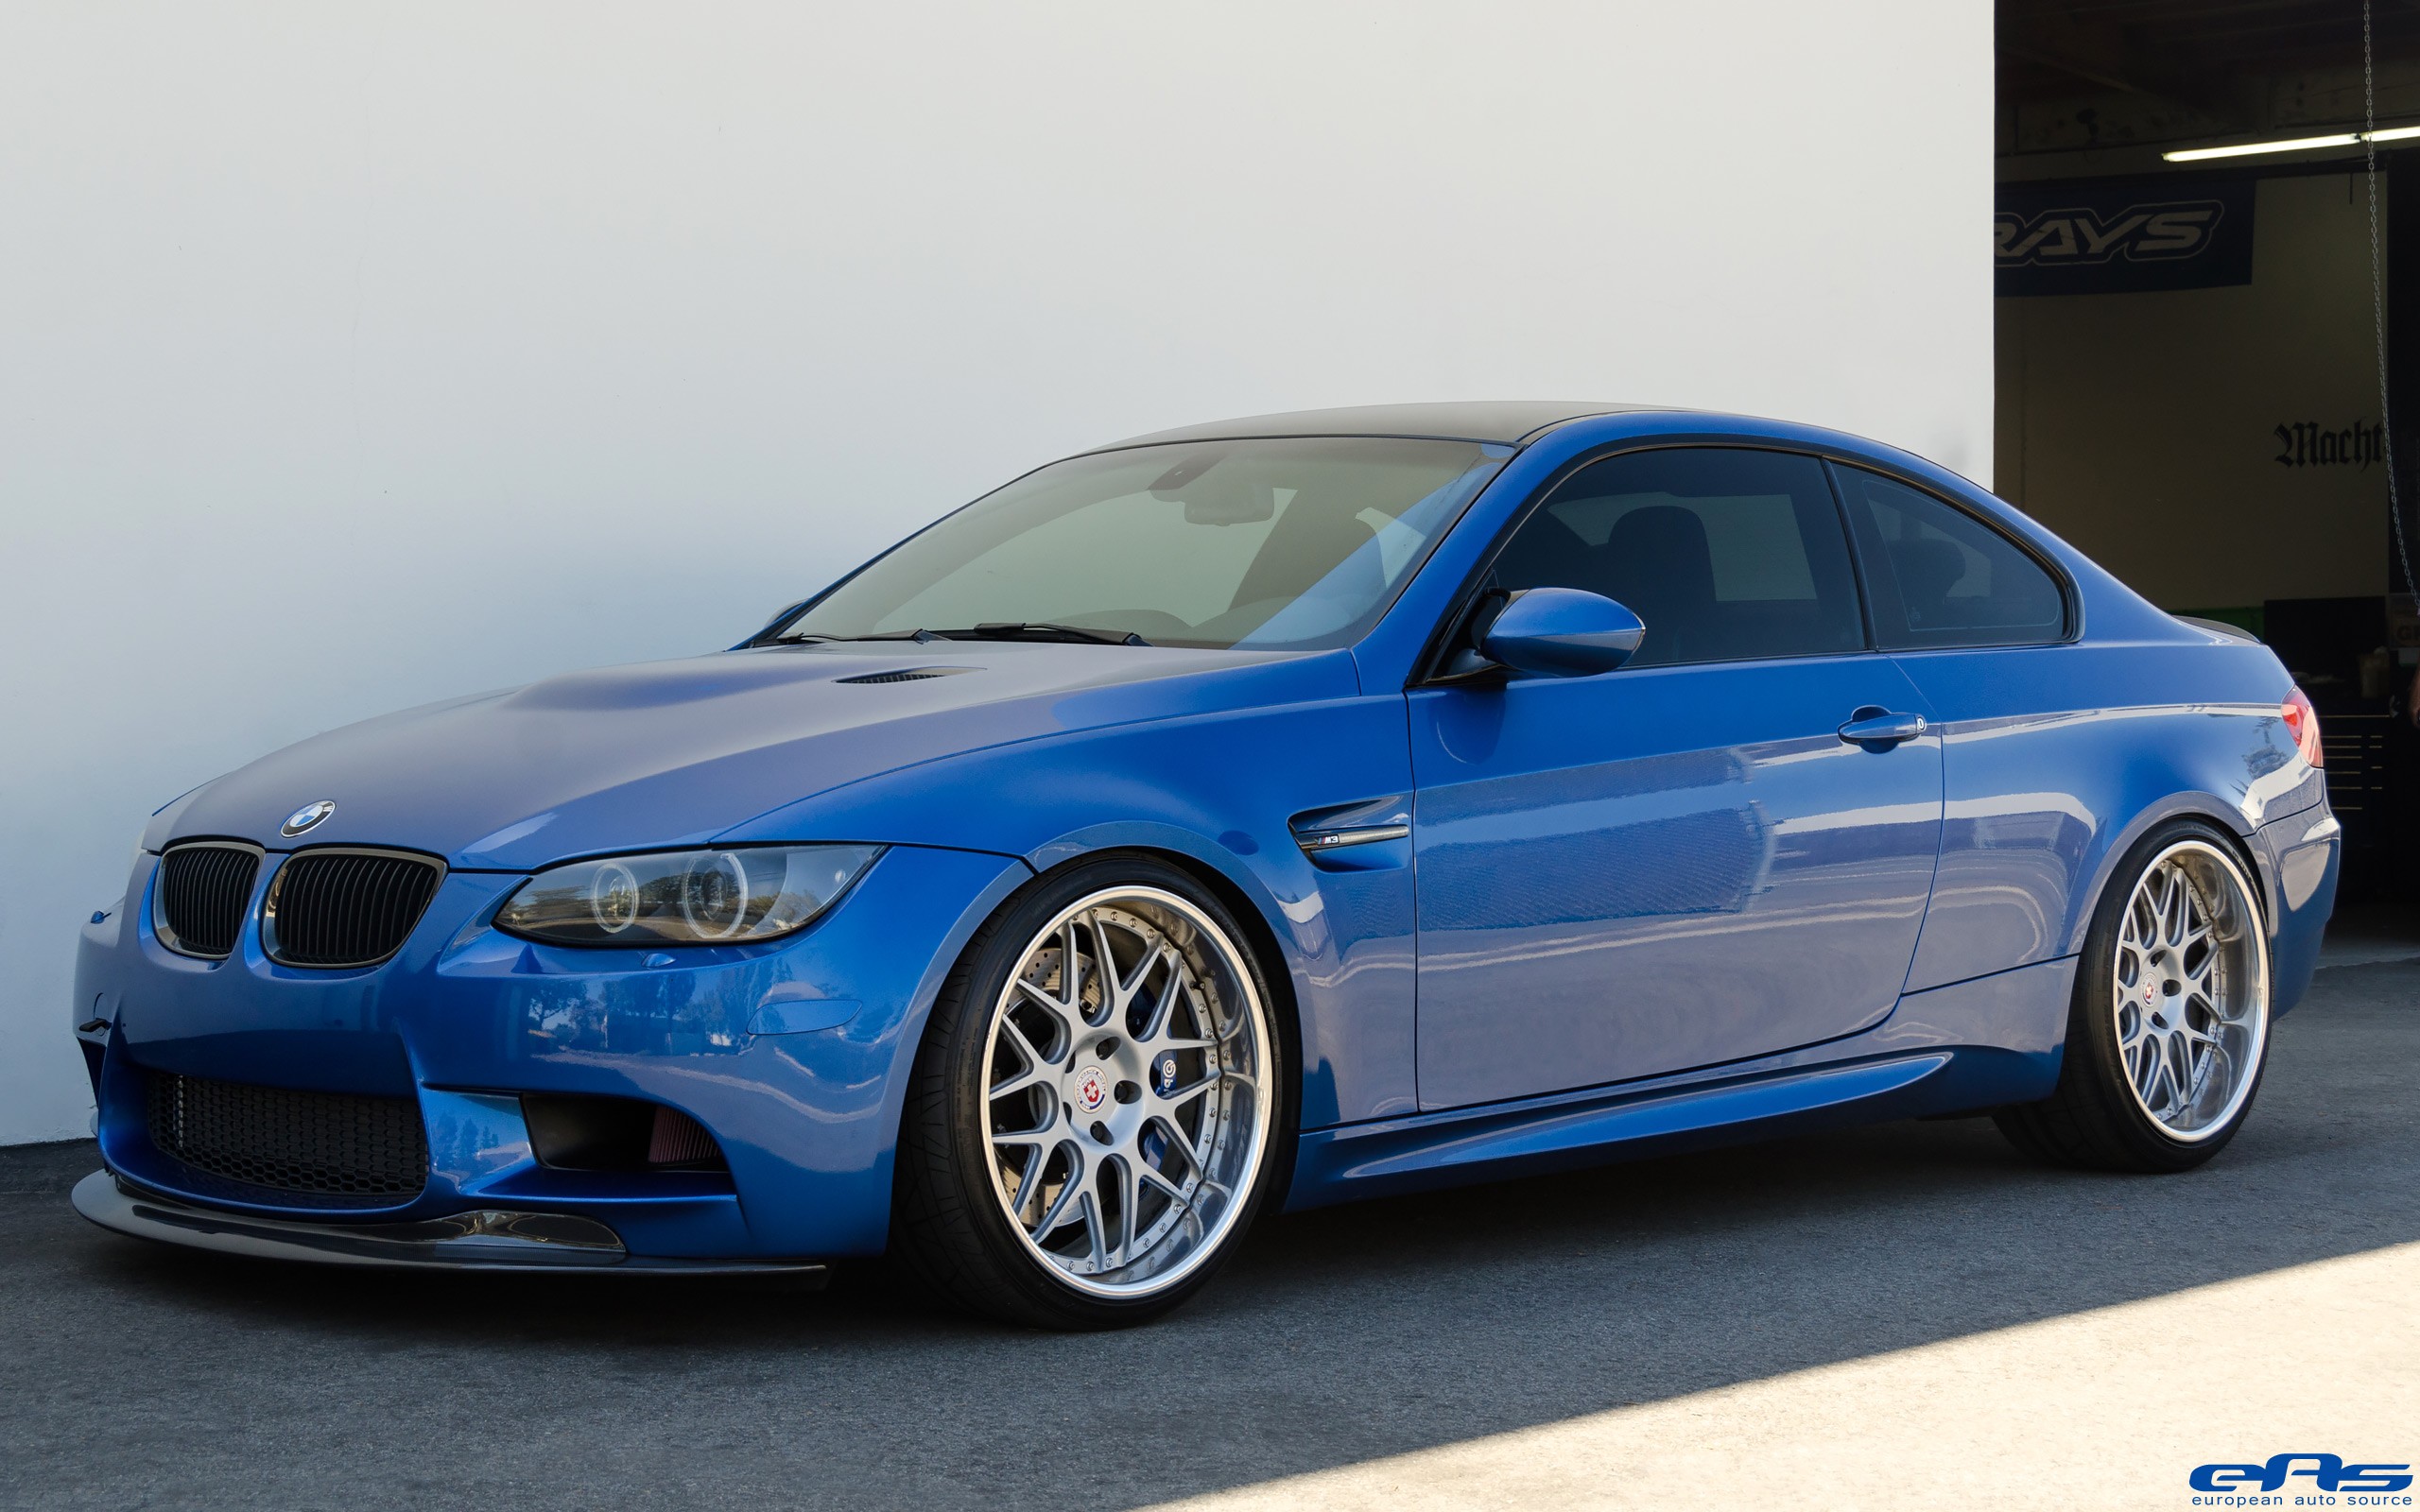 this-one-sick-bmw-e92-m3-makes-us-think-twice-before-checking-out-an-m4-photo-gallery_14.jpg